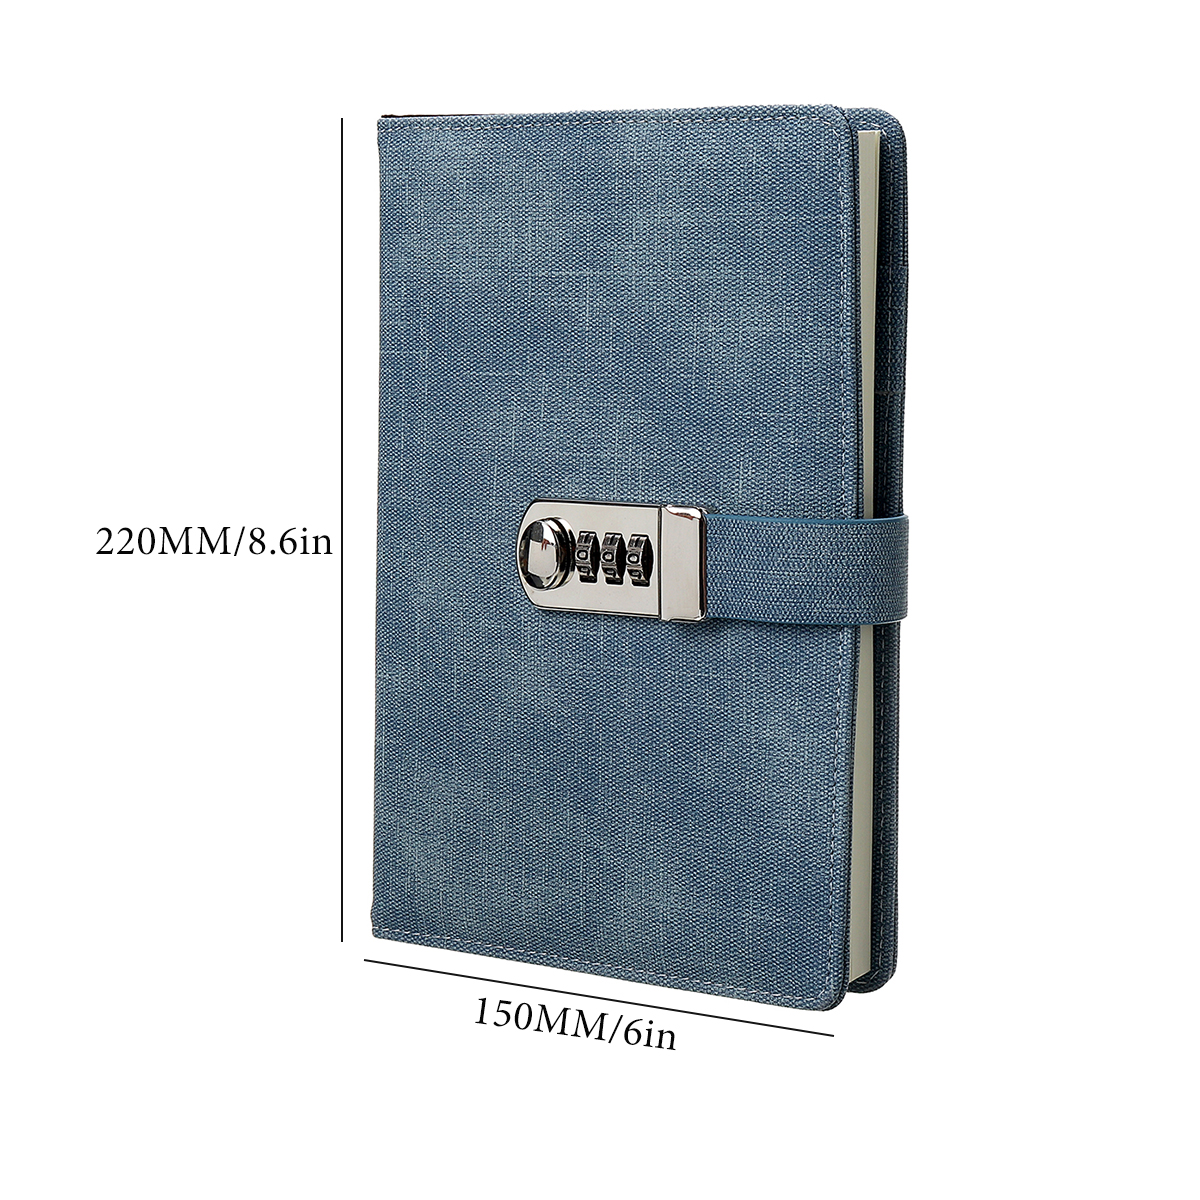 Lockable-A5-Diary-Notebook-Combination-Locking-PU-Journal-Writing-Notebook-Planner-Agenda-Personal-N-1583014-3